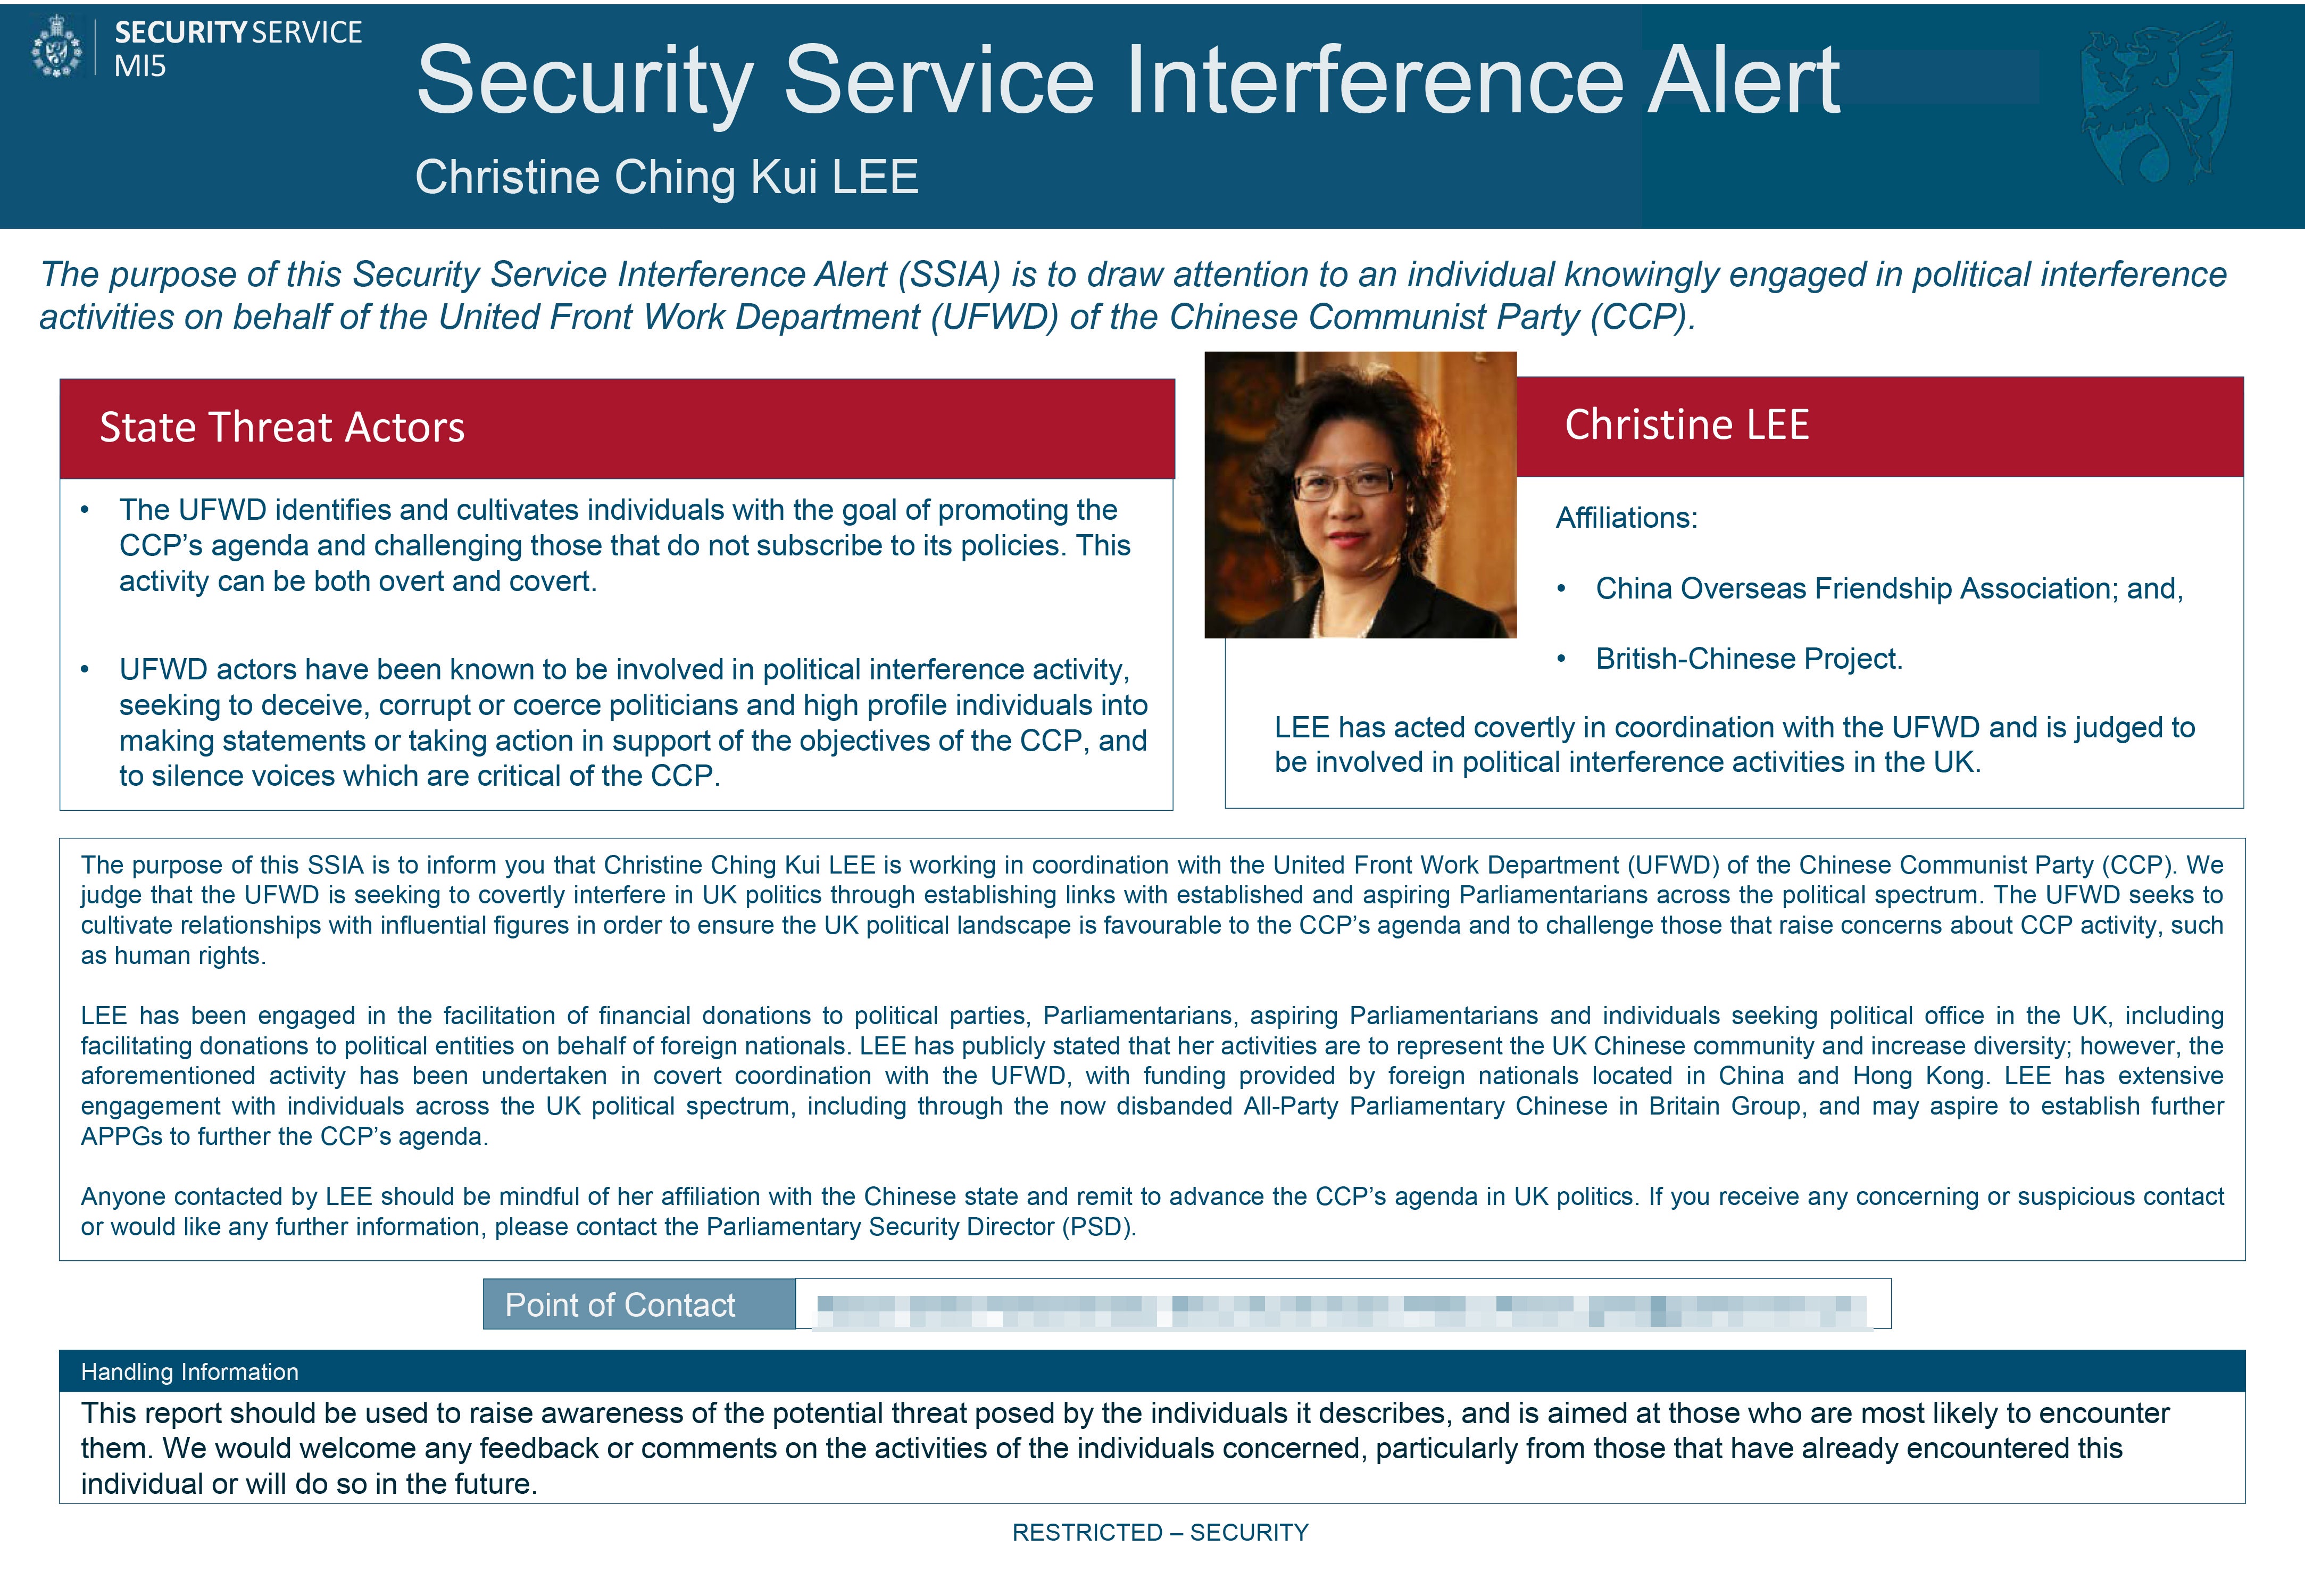 The MI5 Security Service Interference Alert about Christine Ching Kui Lee (MI5/PA)